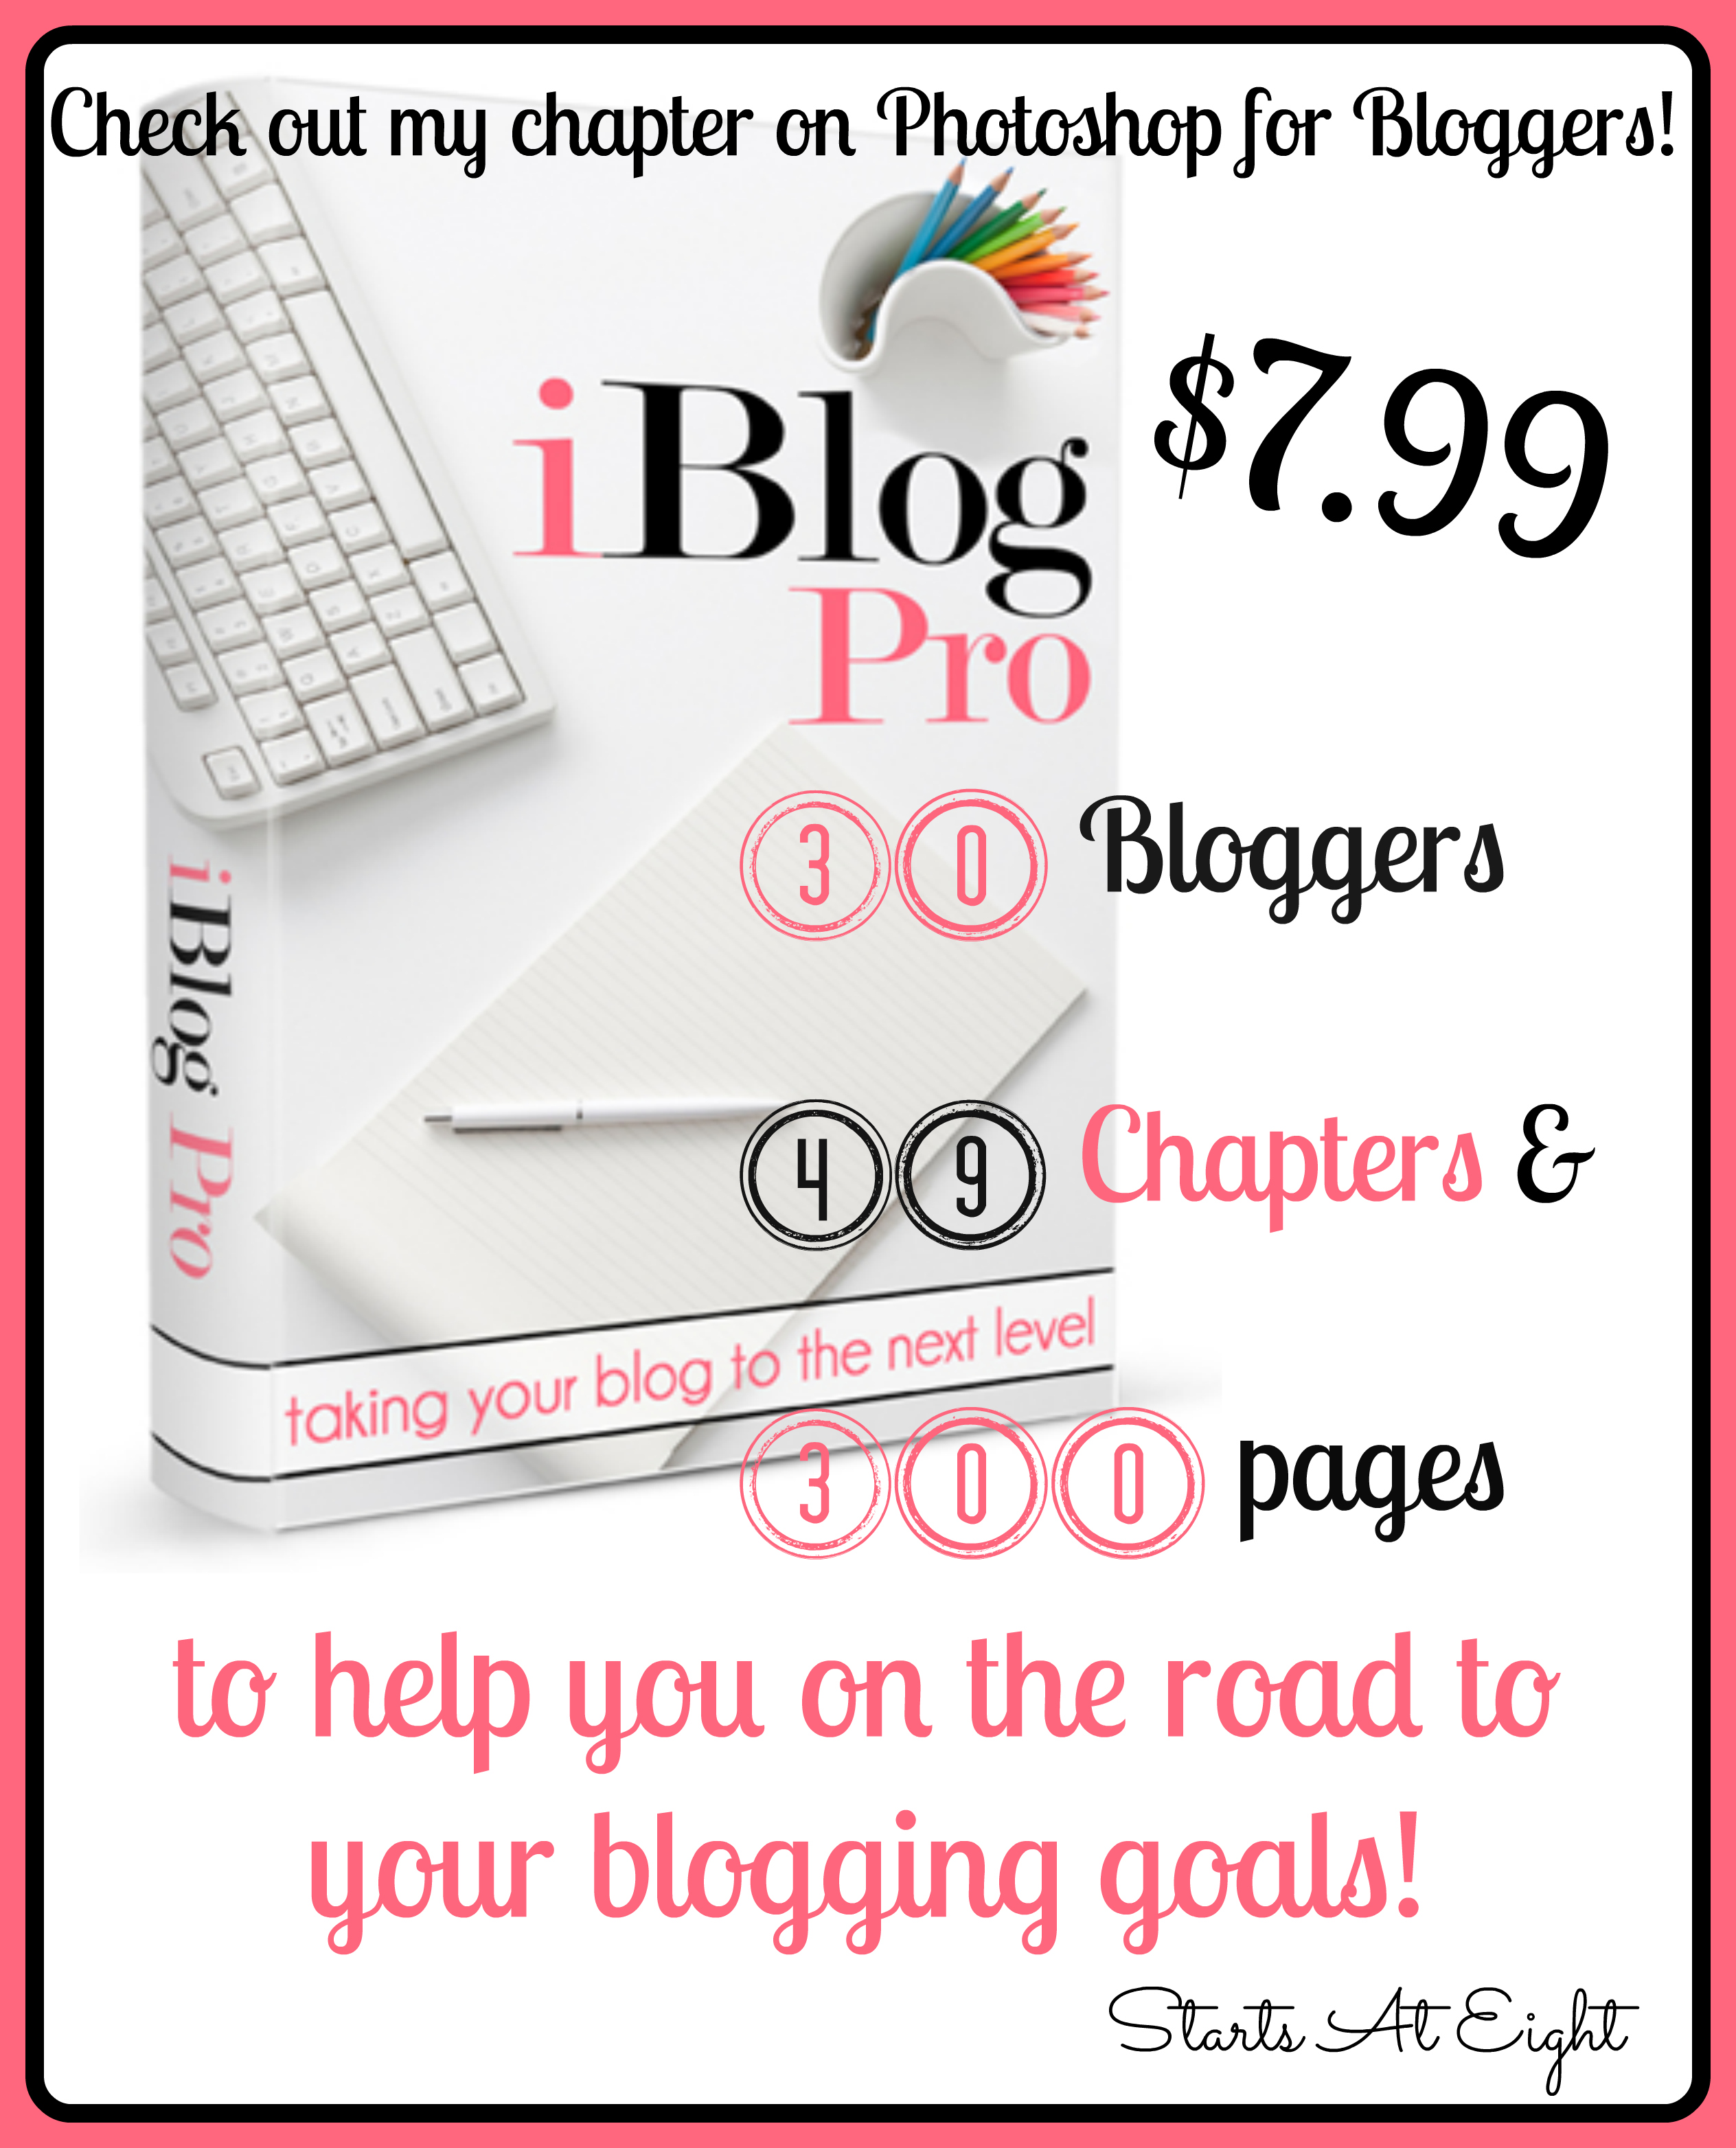 iBlog Pro eBook: Taking Your Blog to the Next Level from Starts At Eight